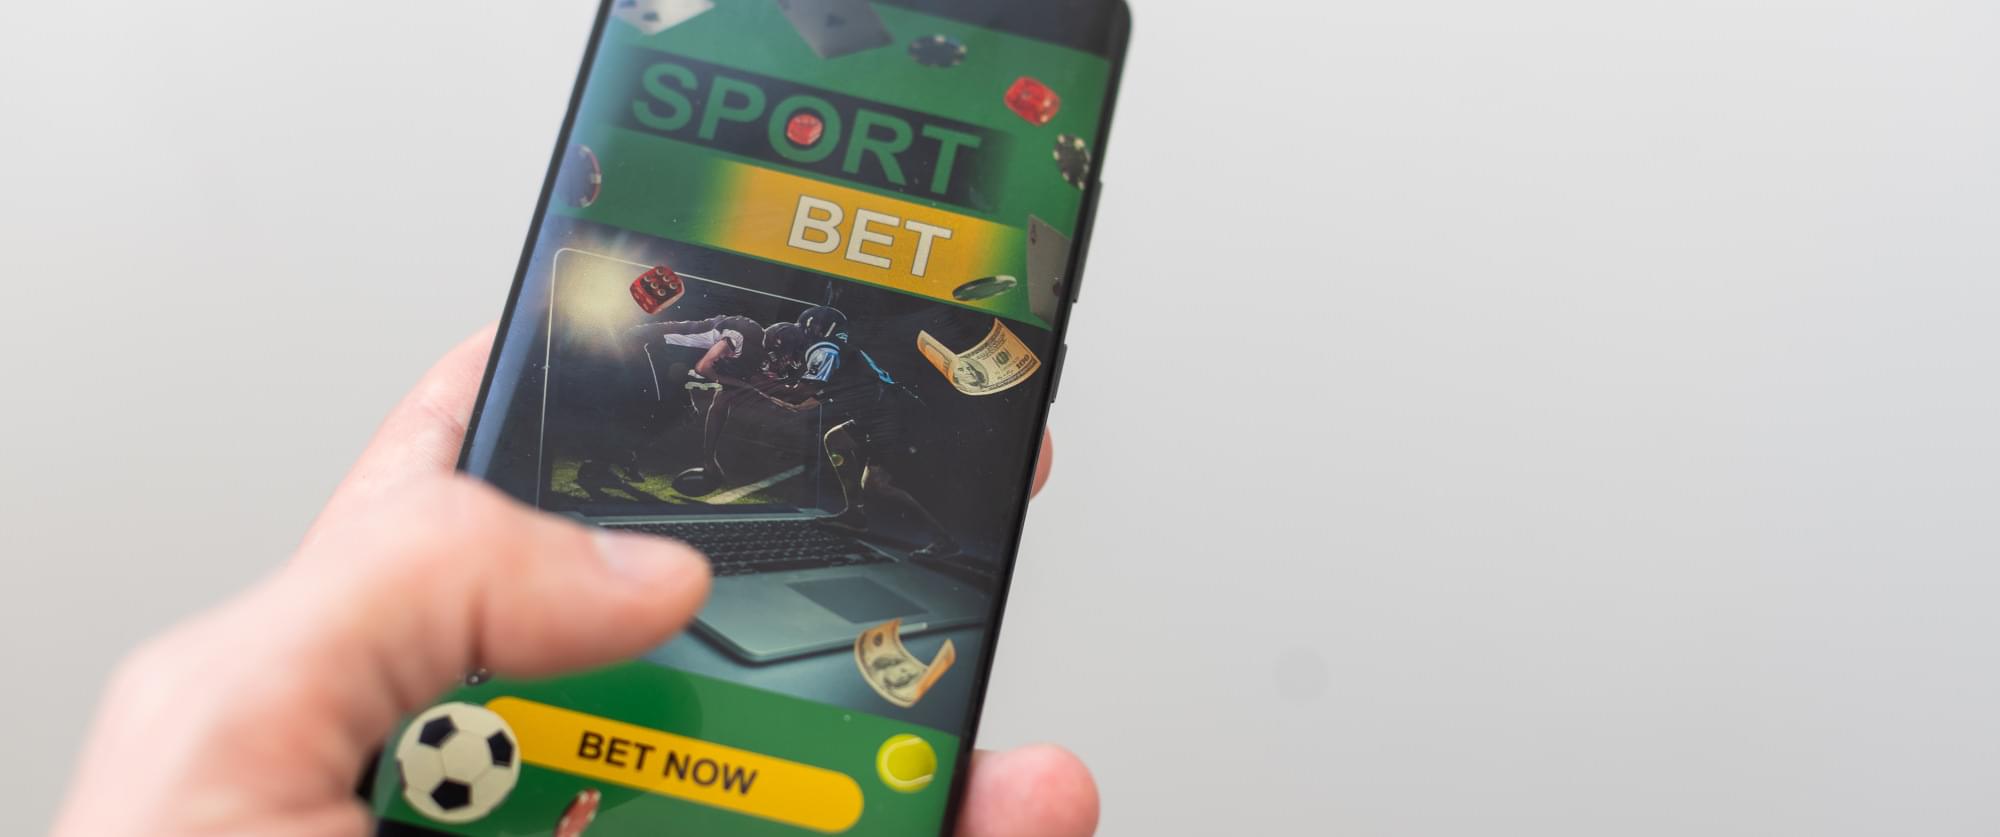 A smartphone with a sports betting application